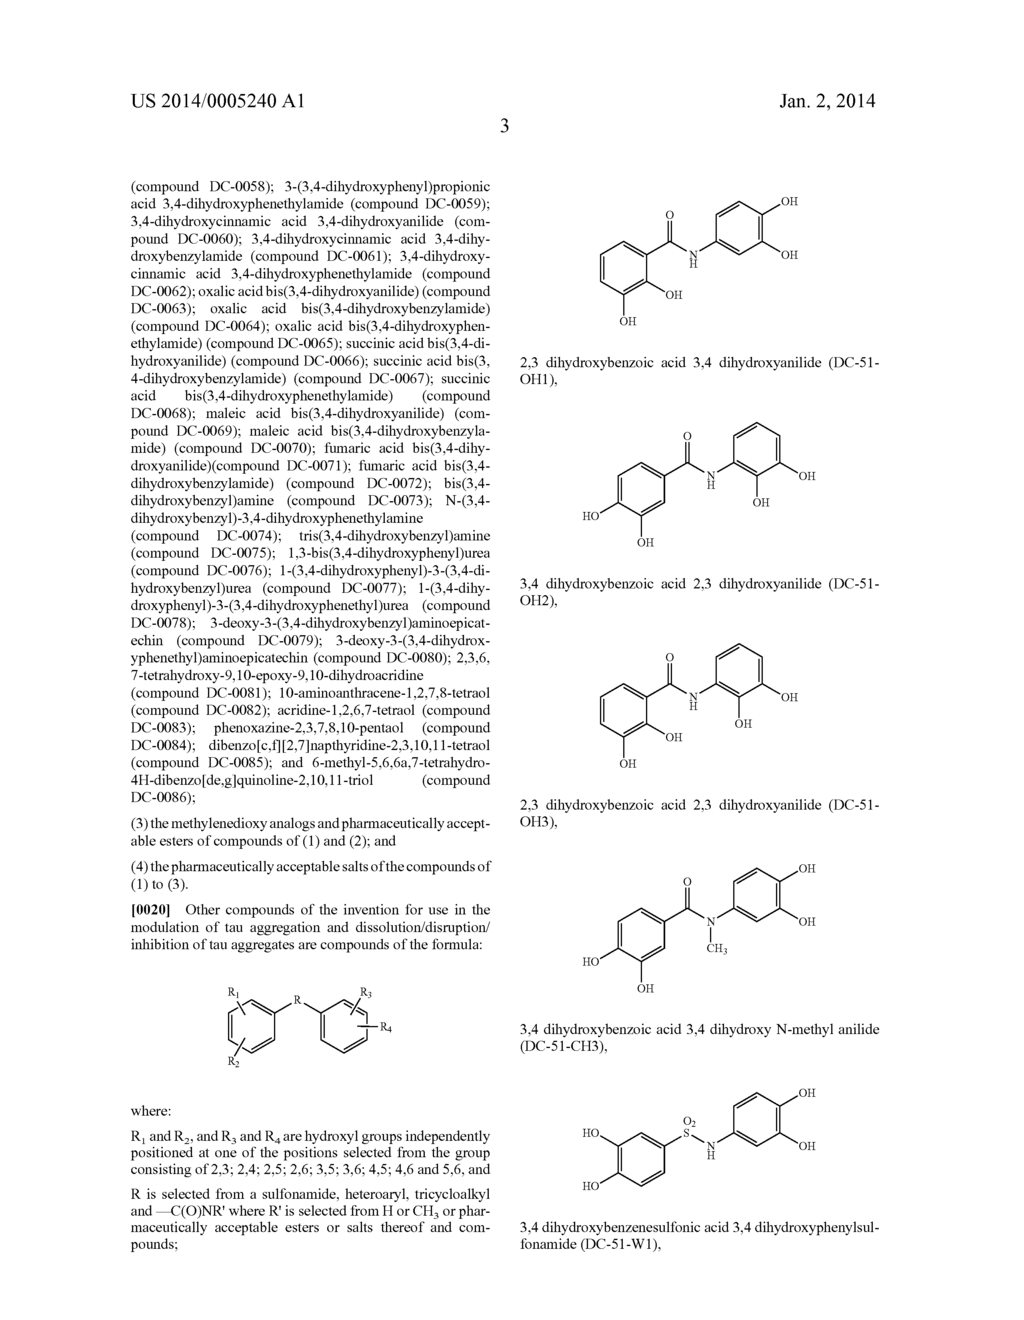 COMPOUNDS AND COMPOSITIONS FOR USE AS MODULATORS OF TAU AGGREGATION AND     ALLEVIATION OF TAUOPATHIES - diagram, schematic, and image 12